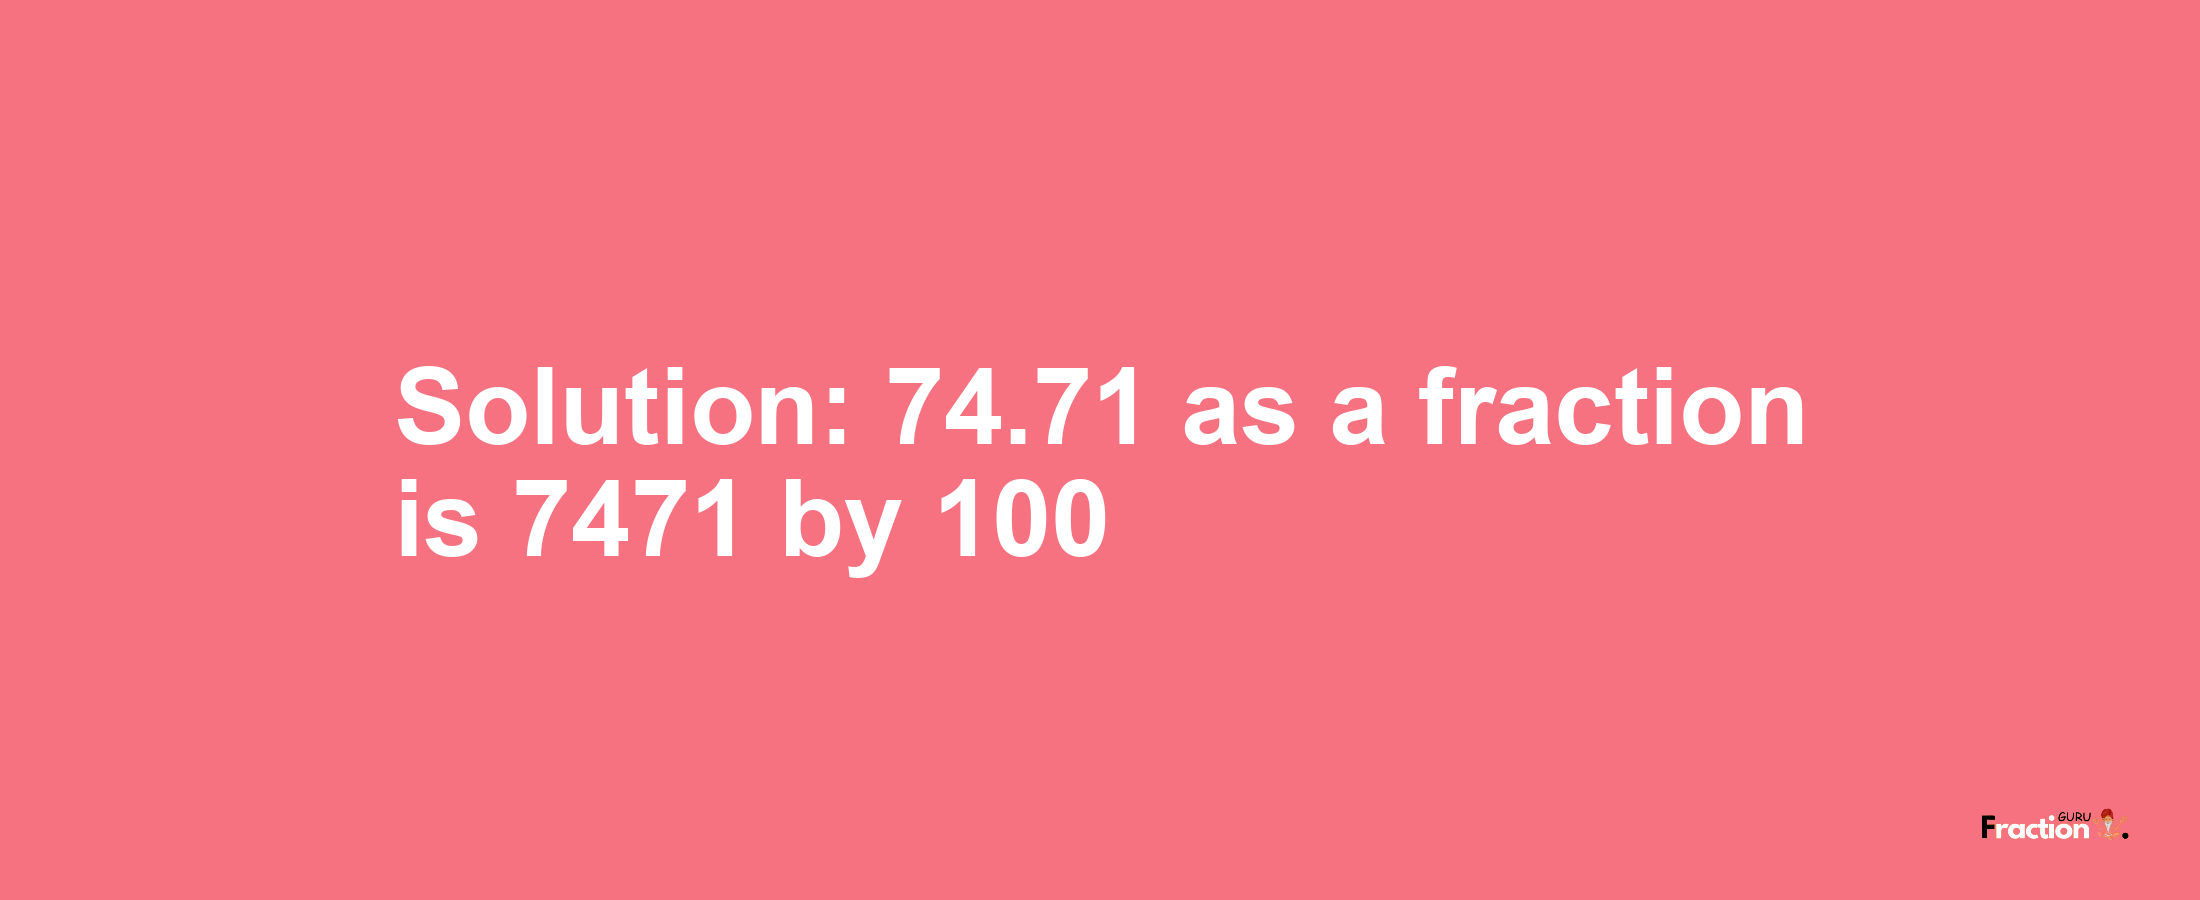 Solution:74.71 as a fraction is 7471/100